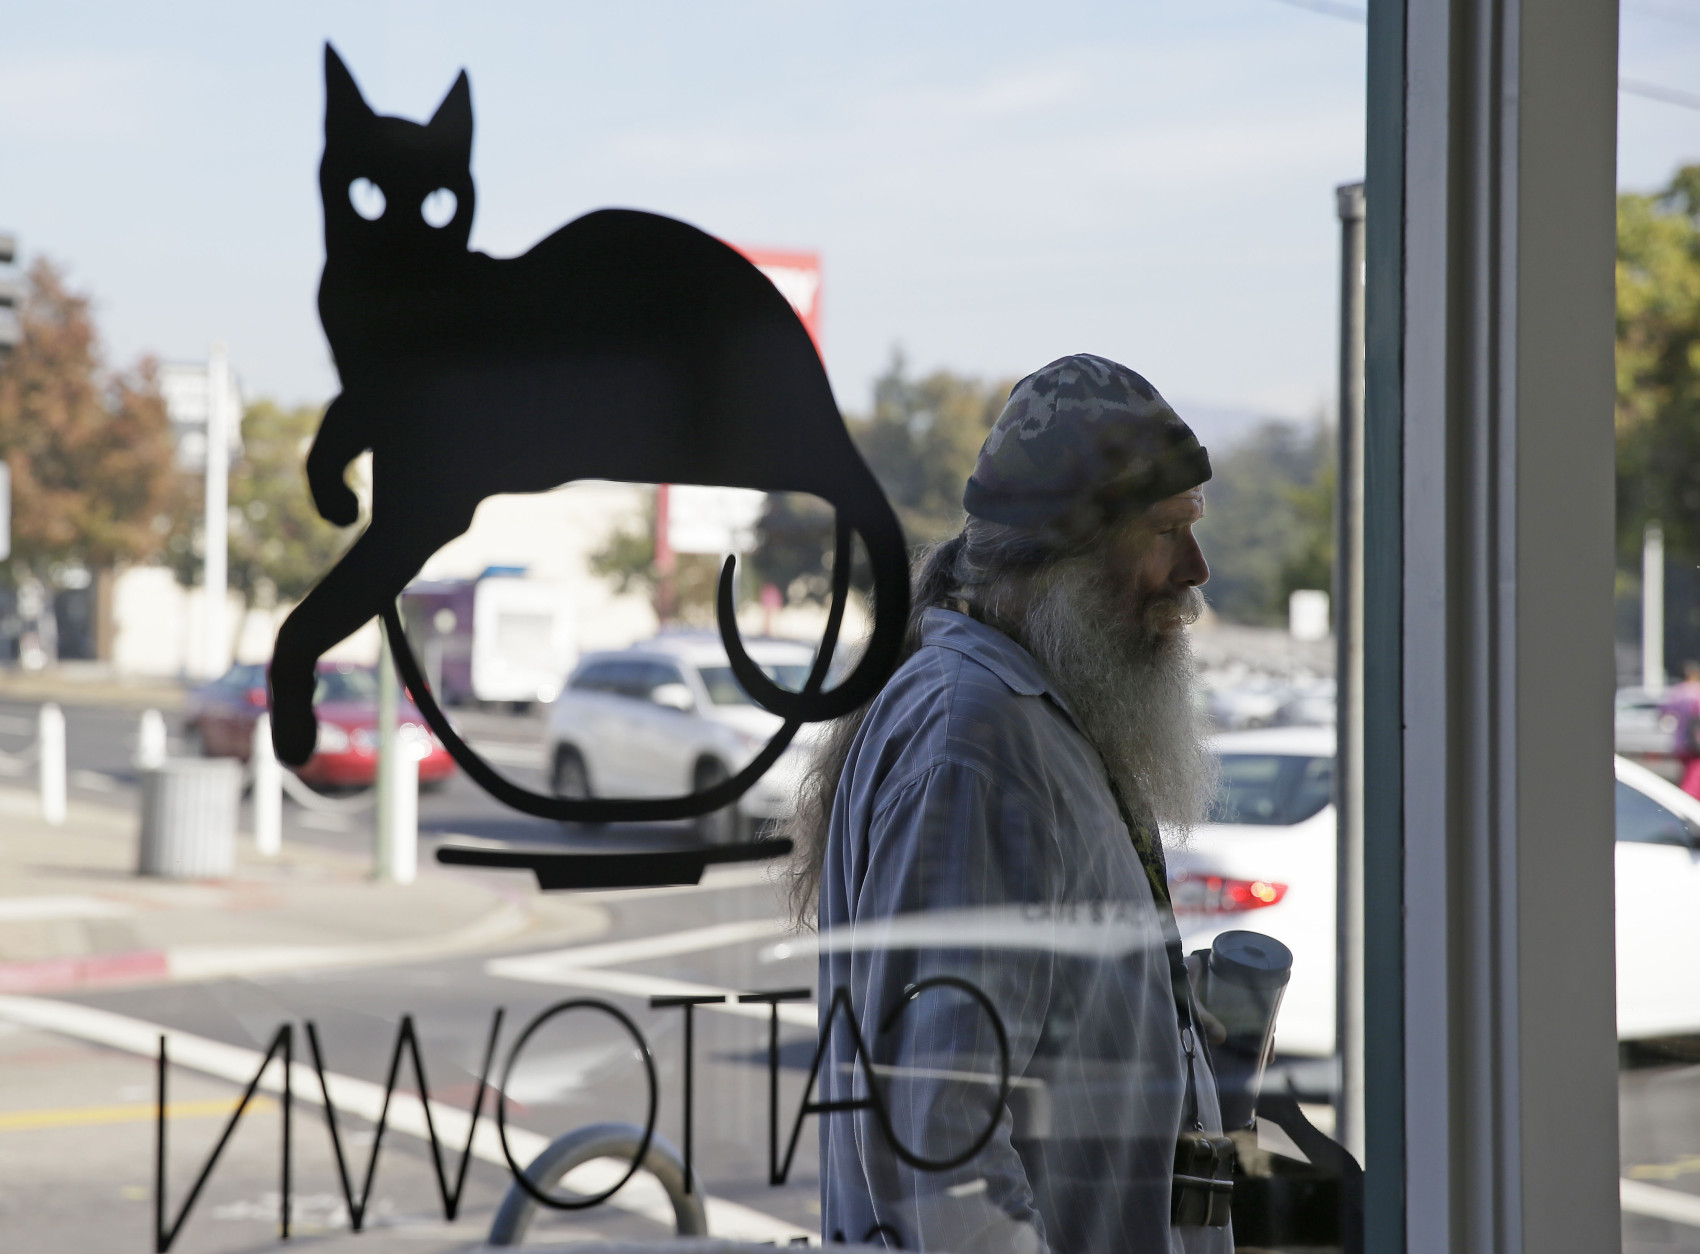 In this photo taken Thursday, Nov. 6, 2014, a man passes by and looks in the windows of people playing with cats at the Cat Town Cafe in Oakland, Calif. Following similar cafe concepts in Asia &amp; Europe, the cafe has become America's first permanent feline-friendly coffee shop. Cafe customers pay to pet cute kitties while sipping on tea or expresso drinks. It allows customers, who may not be able to have cats in their own homes, to enjoy the benefits of furry friends for short times without the responsibility. The animals come from a partnership with a local animal shelter and are also available for adoption. Similar cafes are planned to open soon in Seattle, Portland, San Diego and Denver. (AP Photo/Eric Risberg)